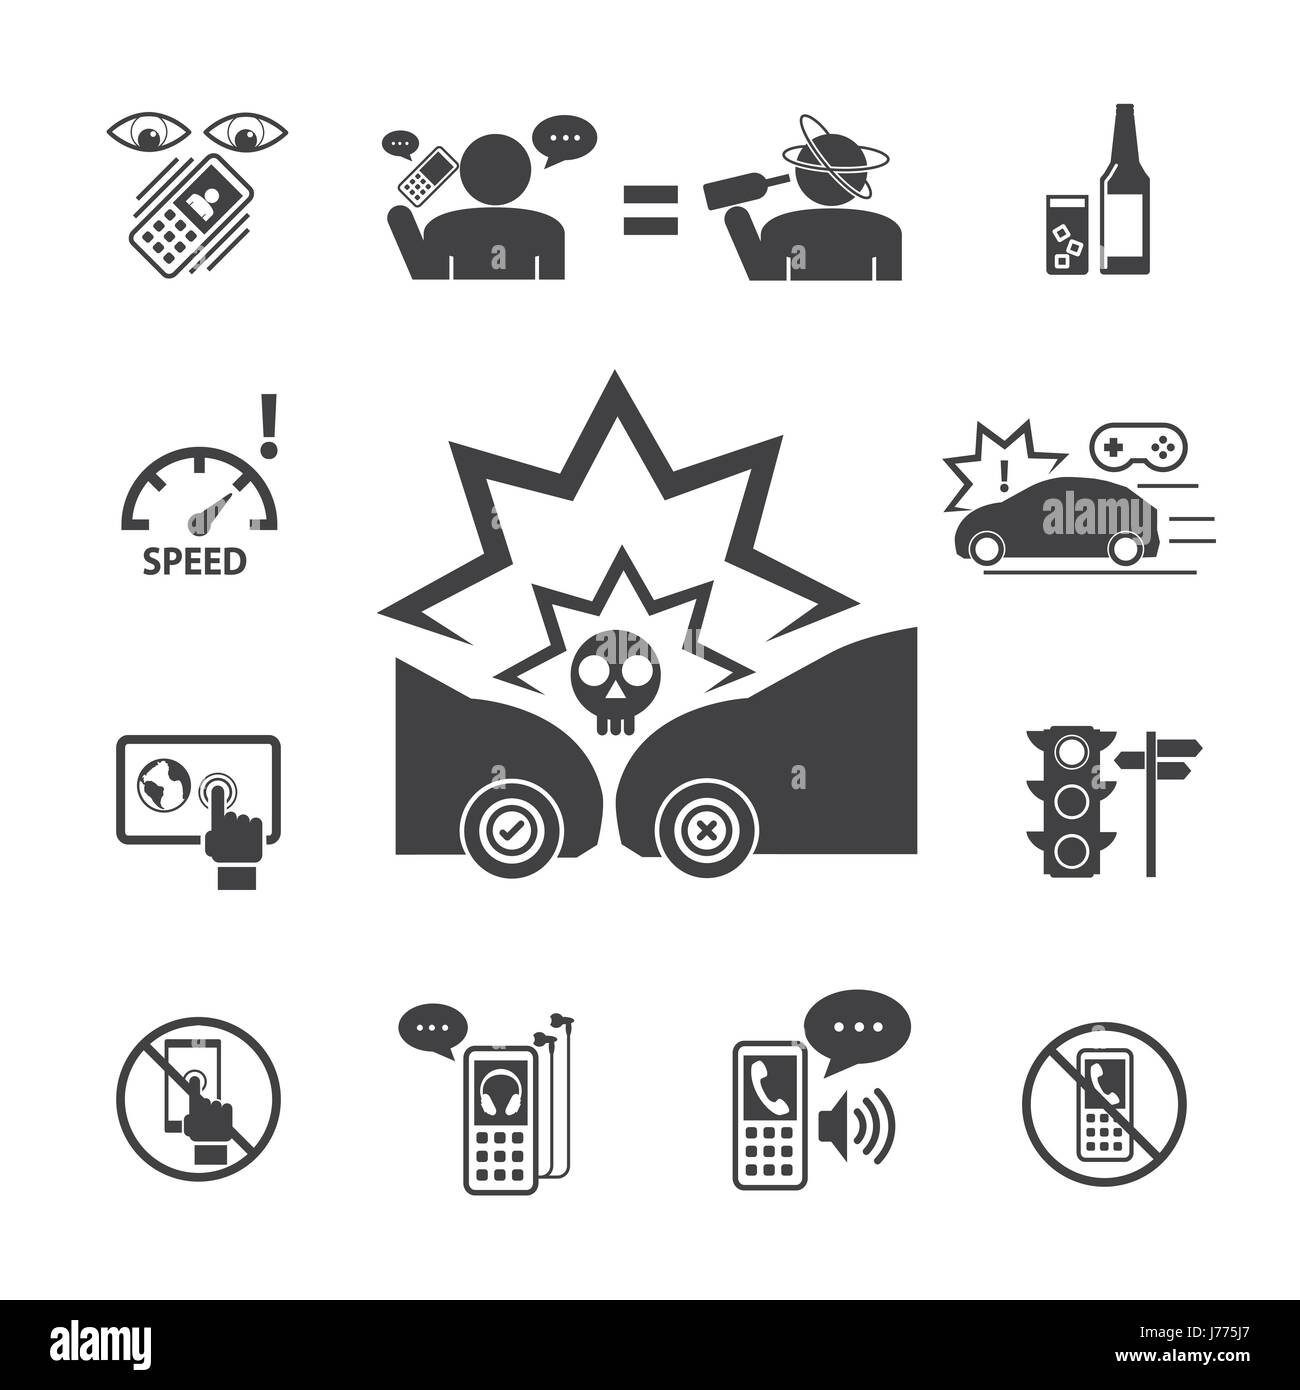 Do not use your phone while driving.Vector icons set for Infographic and Mobile application. Stock Vector